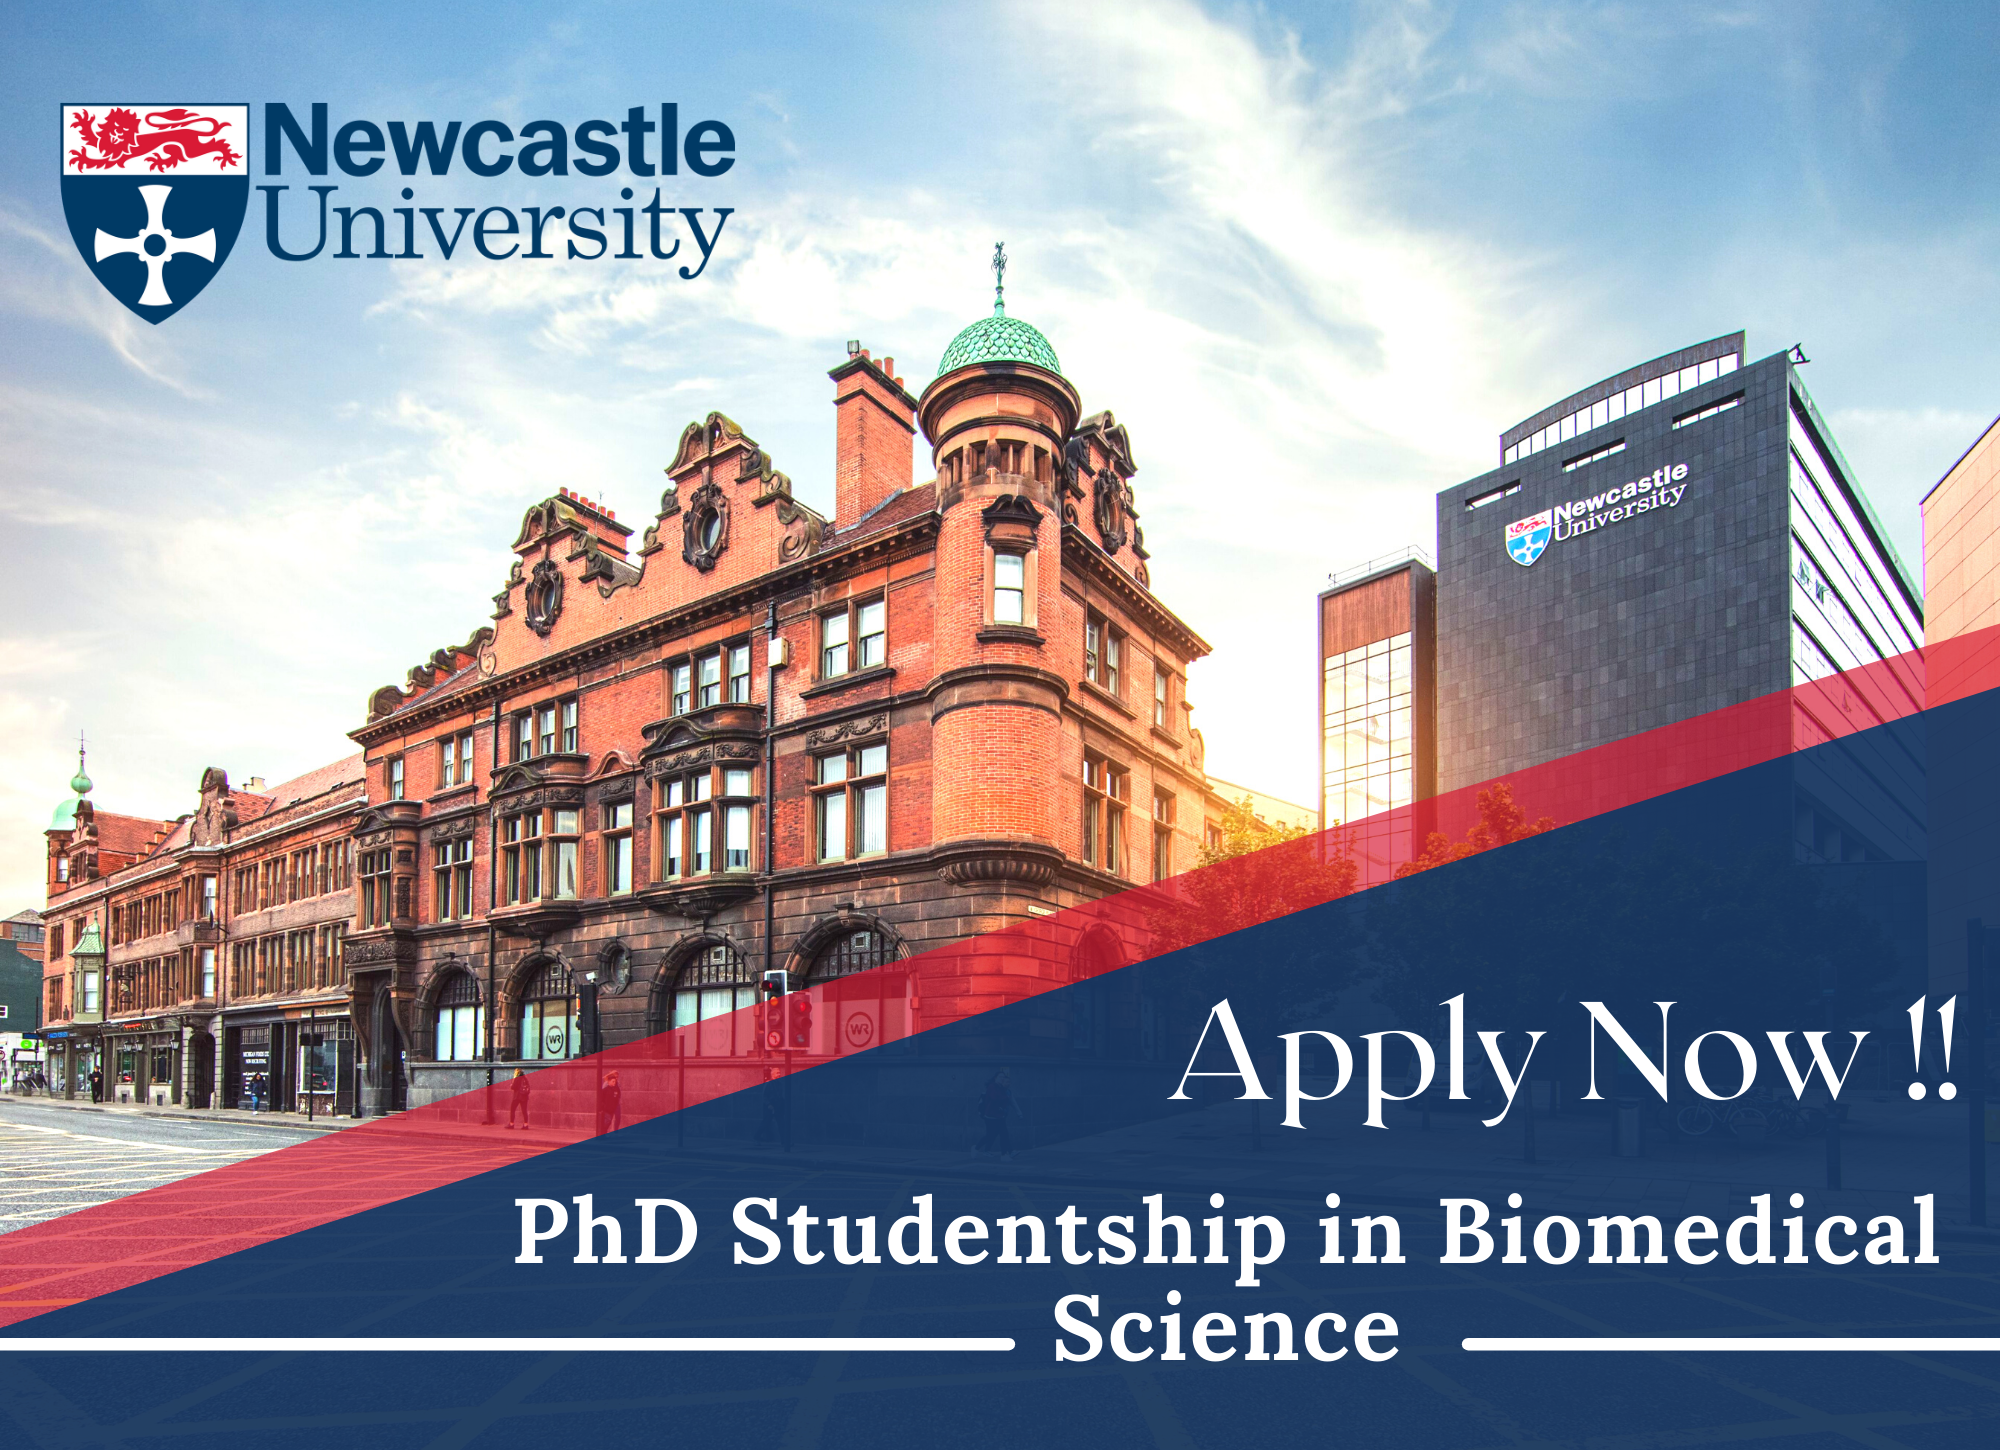 PhD Studentship in Biomedical Science at Newcastle University